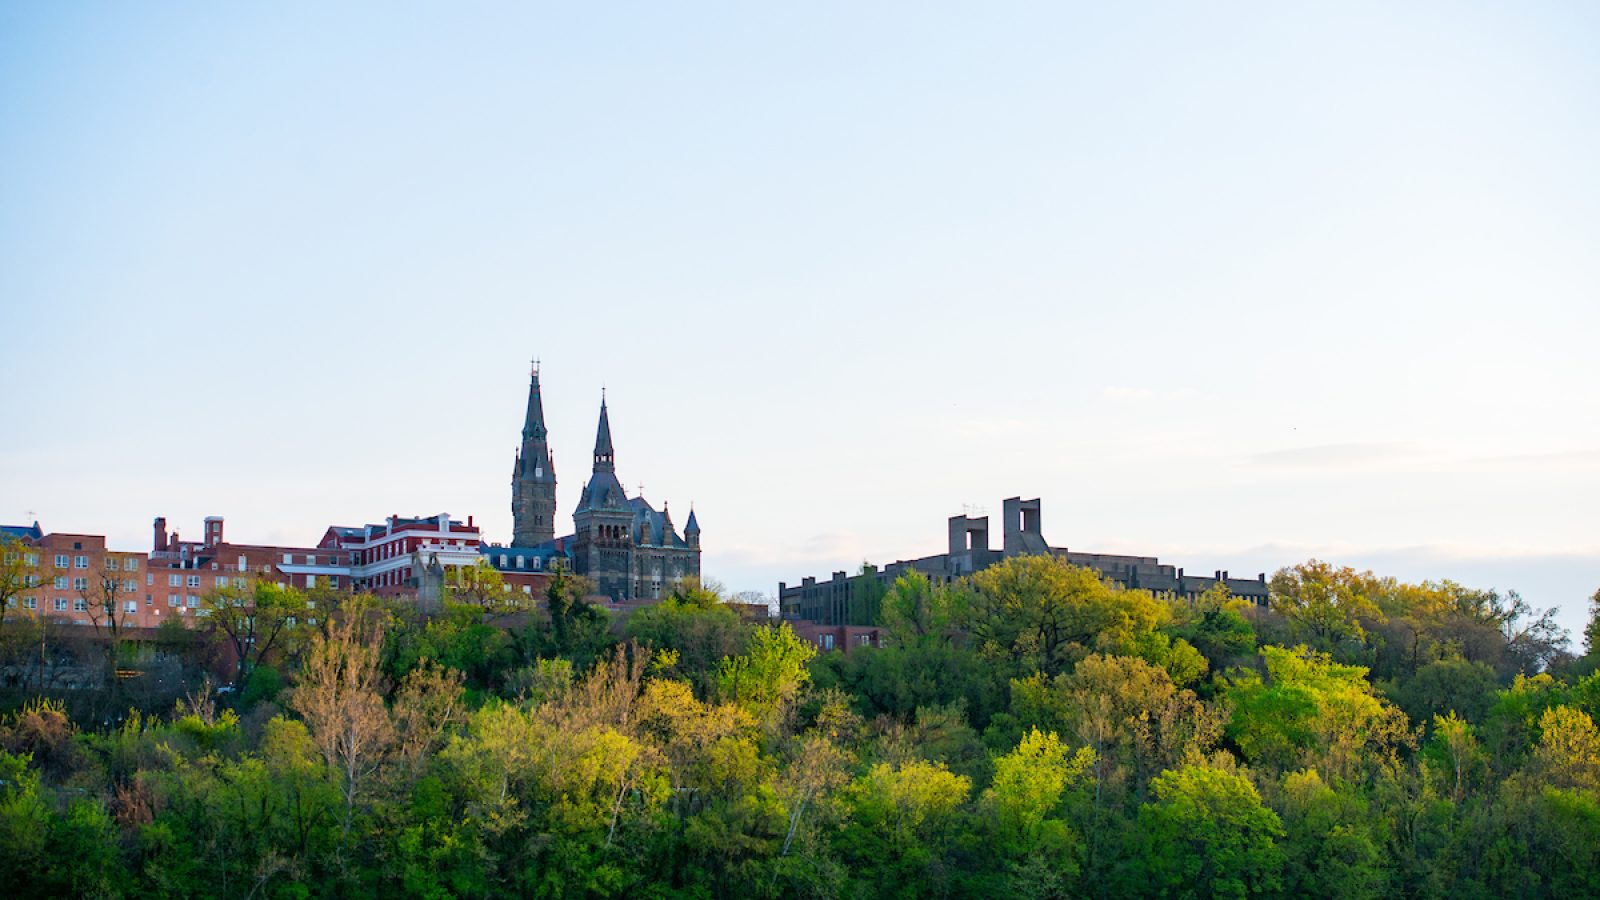 View of Georgetown University campus from Potomac River spring